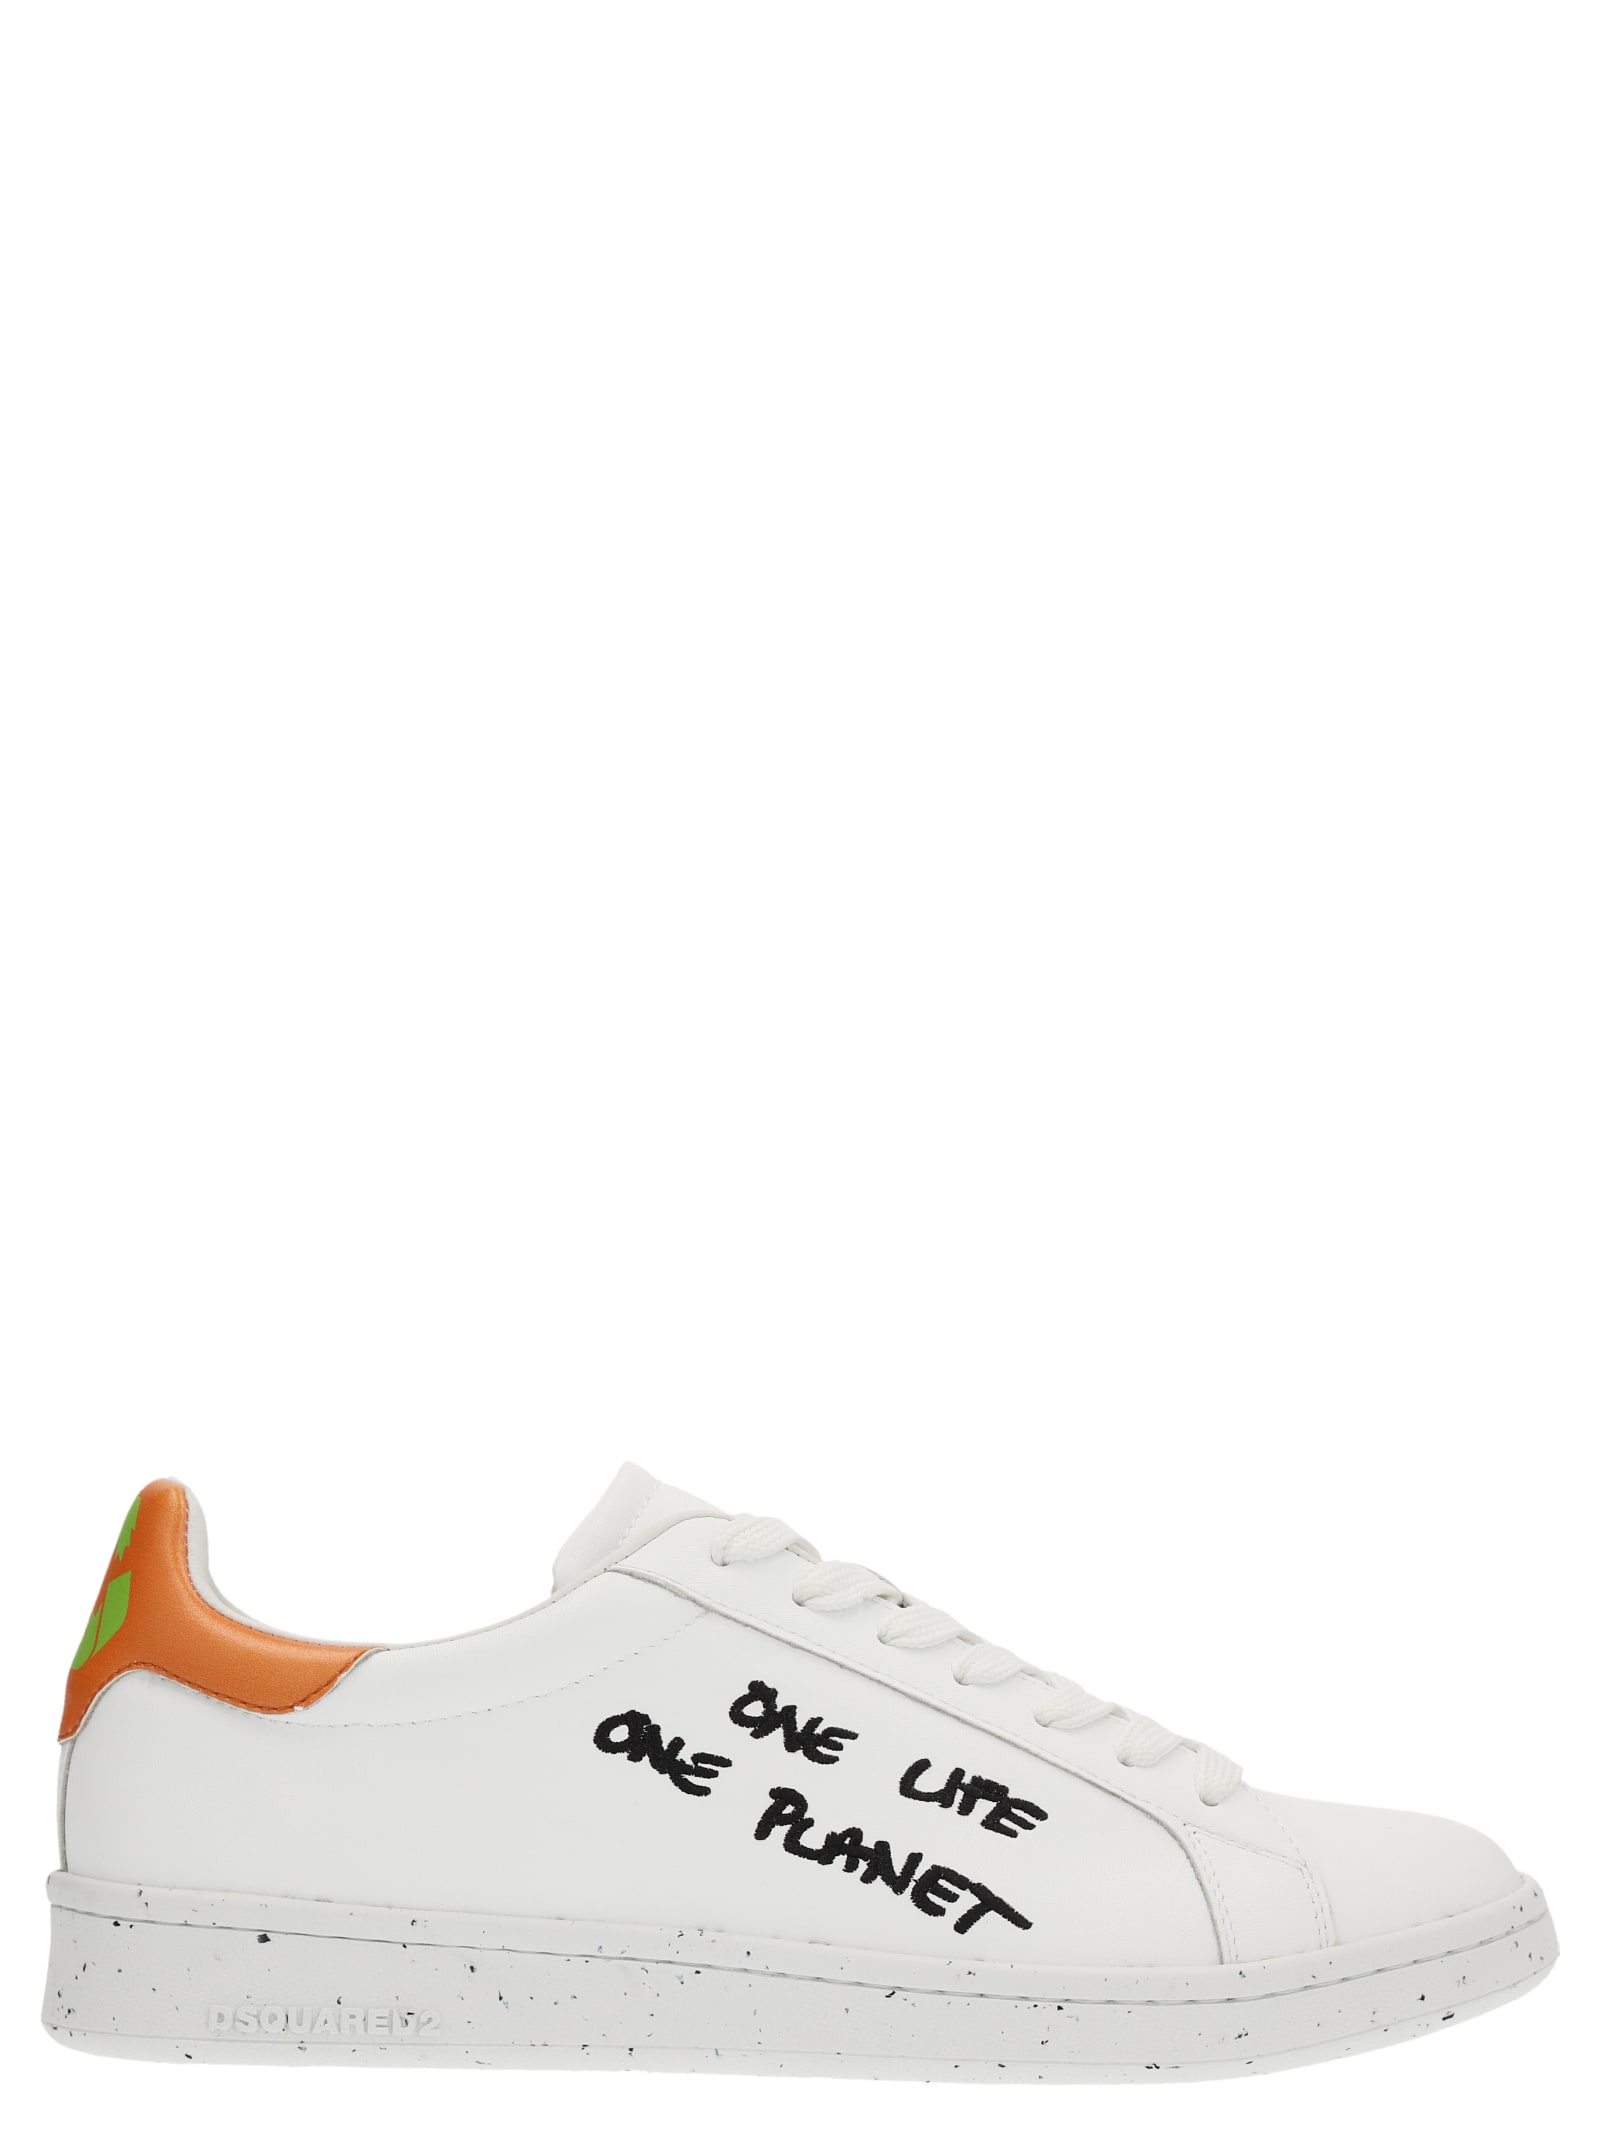 Dsquared2 one Life One Planet Sneakers